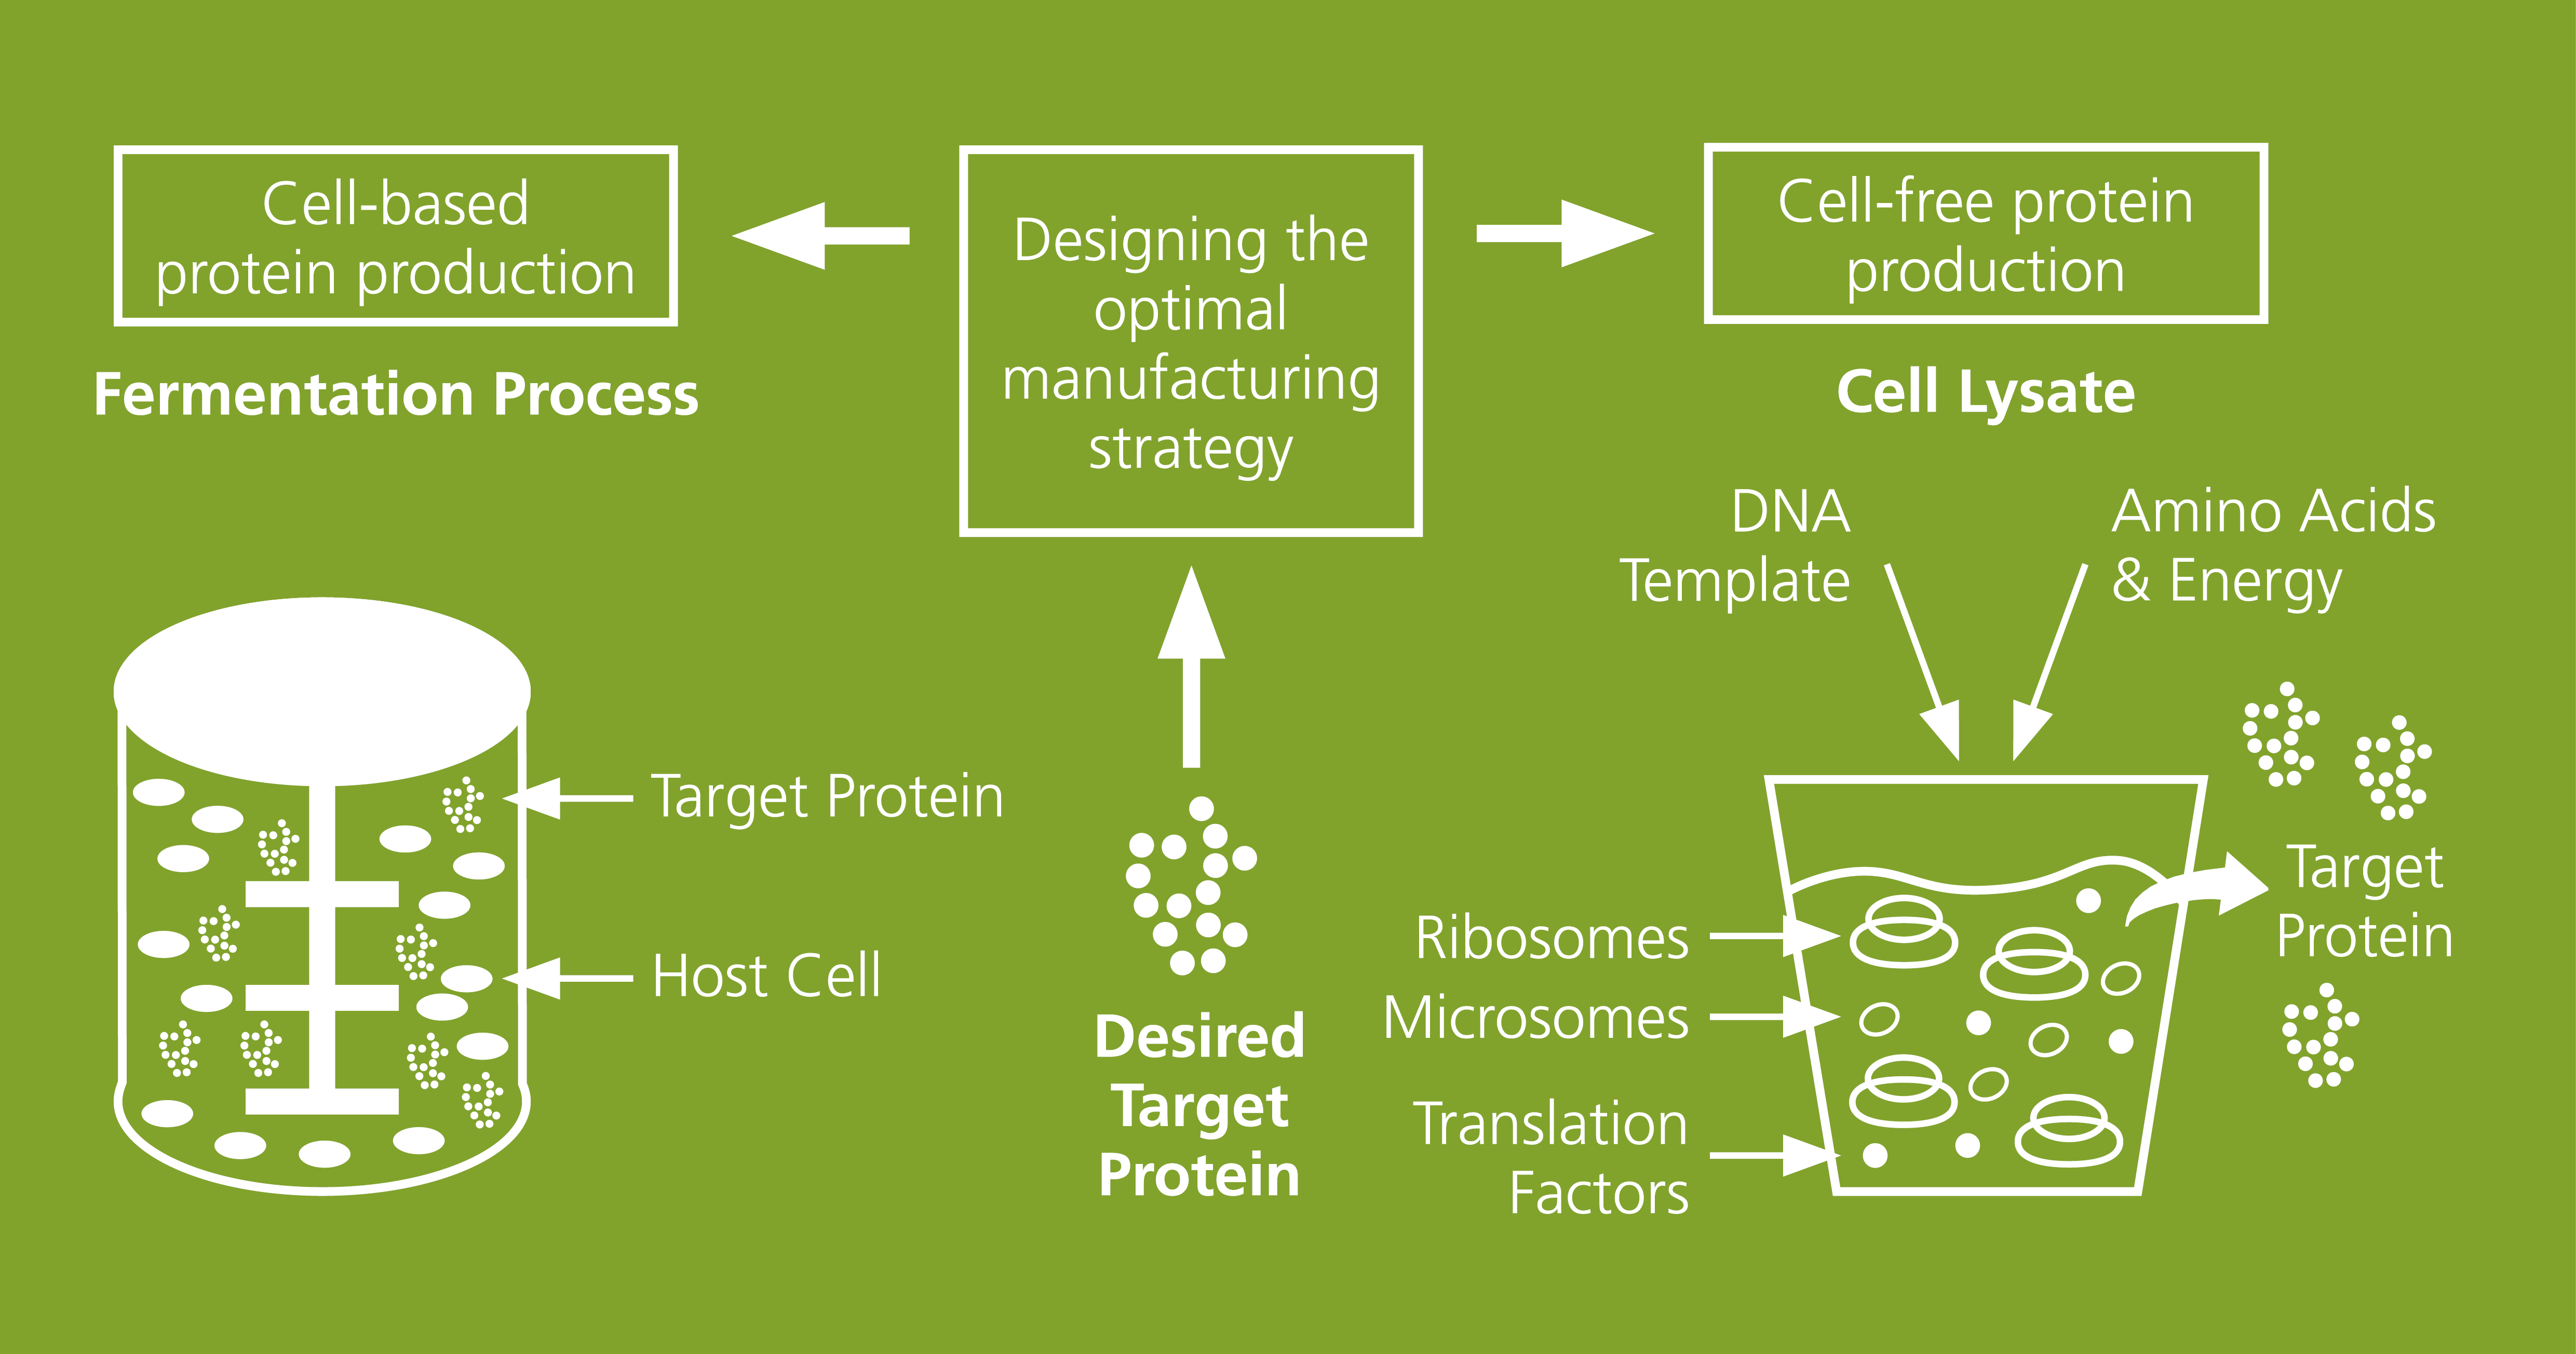 Development and evaluation of protein production processes adapted to the individual conditions of a desired target protein. In addition to conventional, cell-based protein production systems (left part of the figure), Fraunhofer IZI-BB has specialized cell-free protein synthesis platforms (right part of the figure), which enable the rapid and parallelized synthesis of proteins. The choice of method depends on the future application and the characteristics of the proteins.